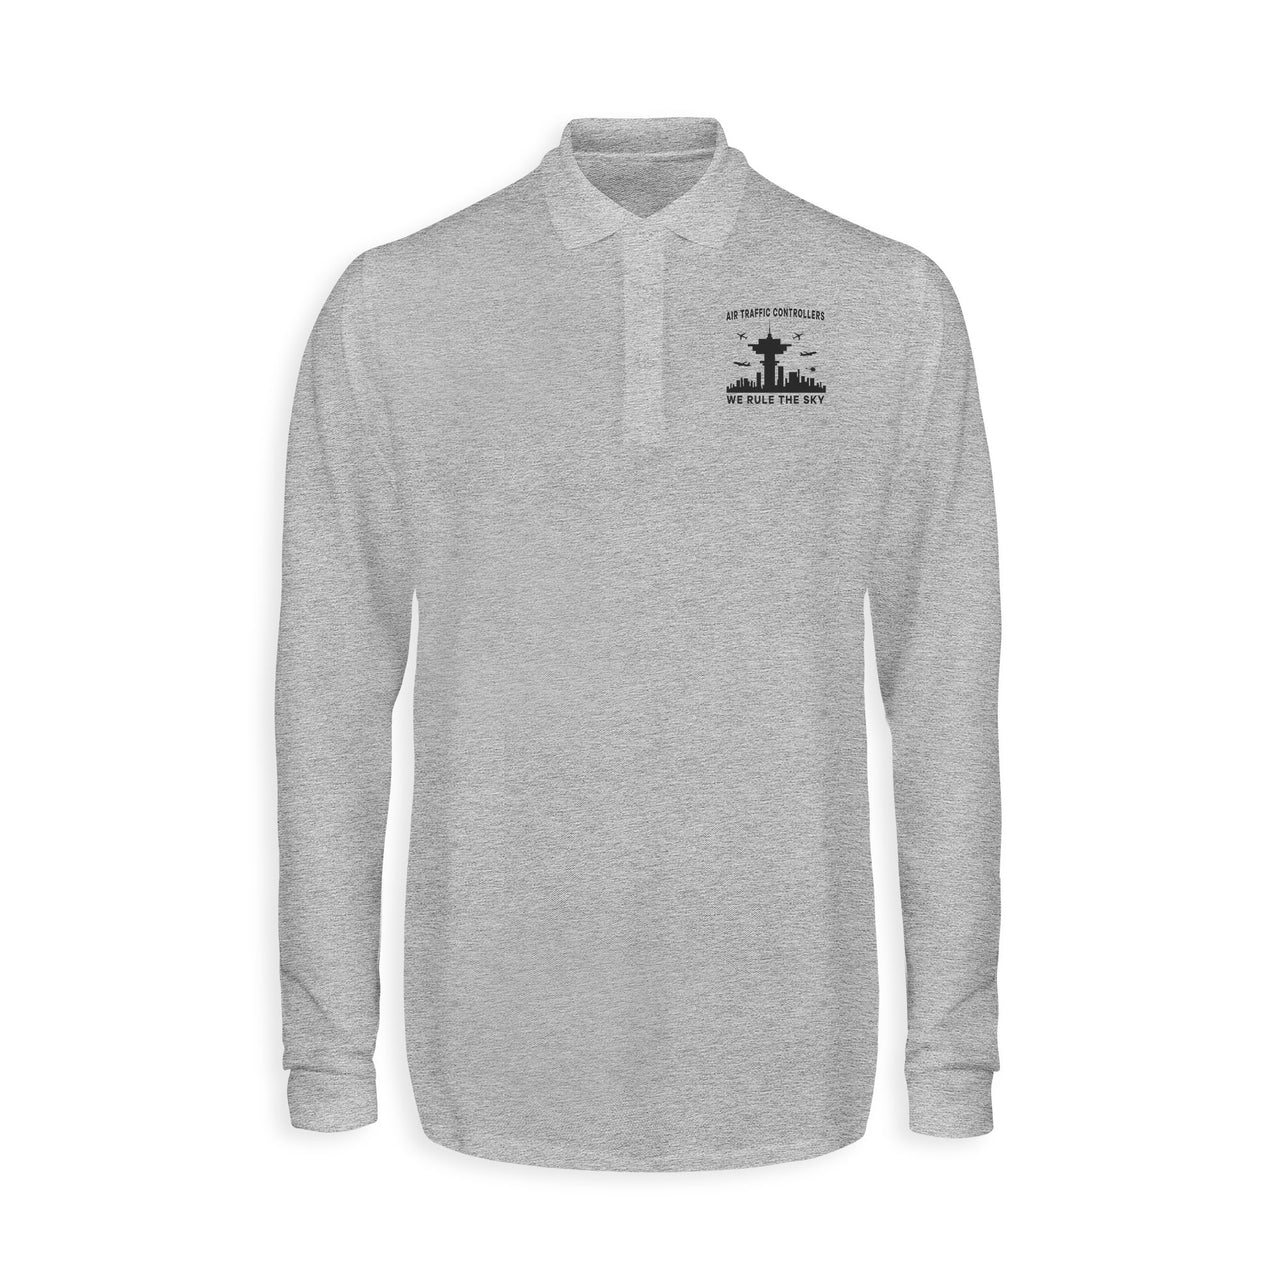 Air Traffic Controllers - We Rule The Sky Designed Long Sleeve Polo T-Shirts